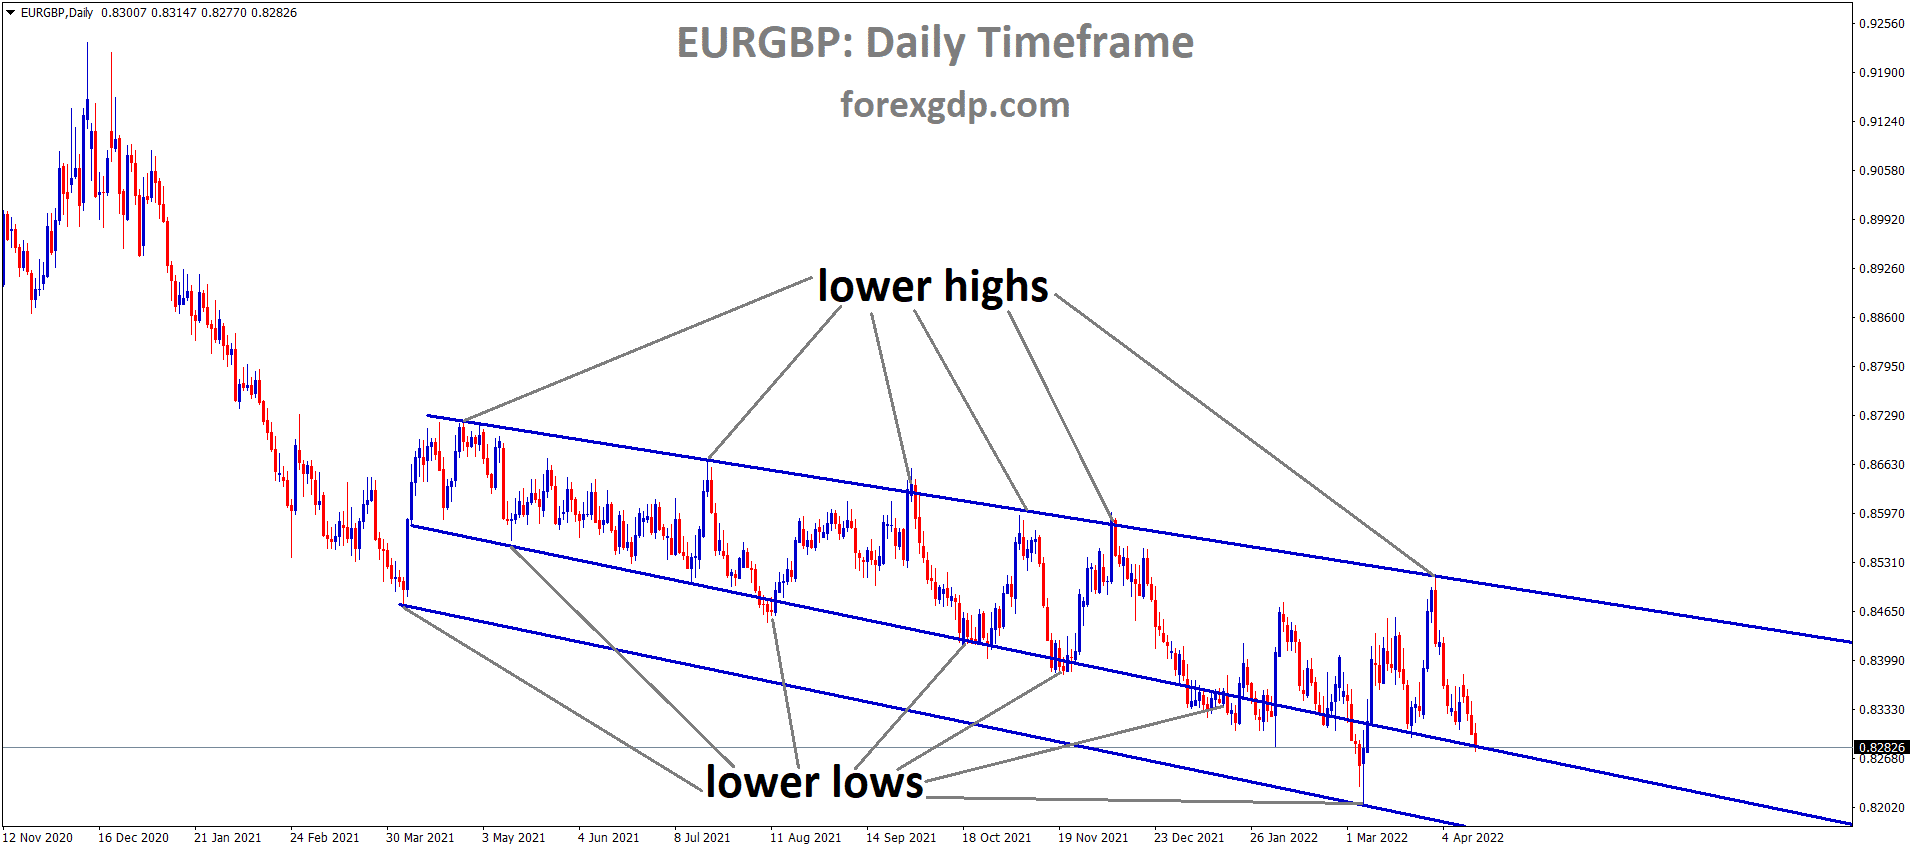 EURGBP Daily Time Frame Analysis Market is moving in the Descending Channel and the market has reached the lower low area of the Minor line of Descending Channel.